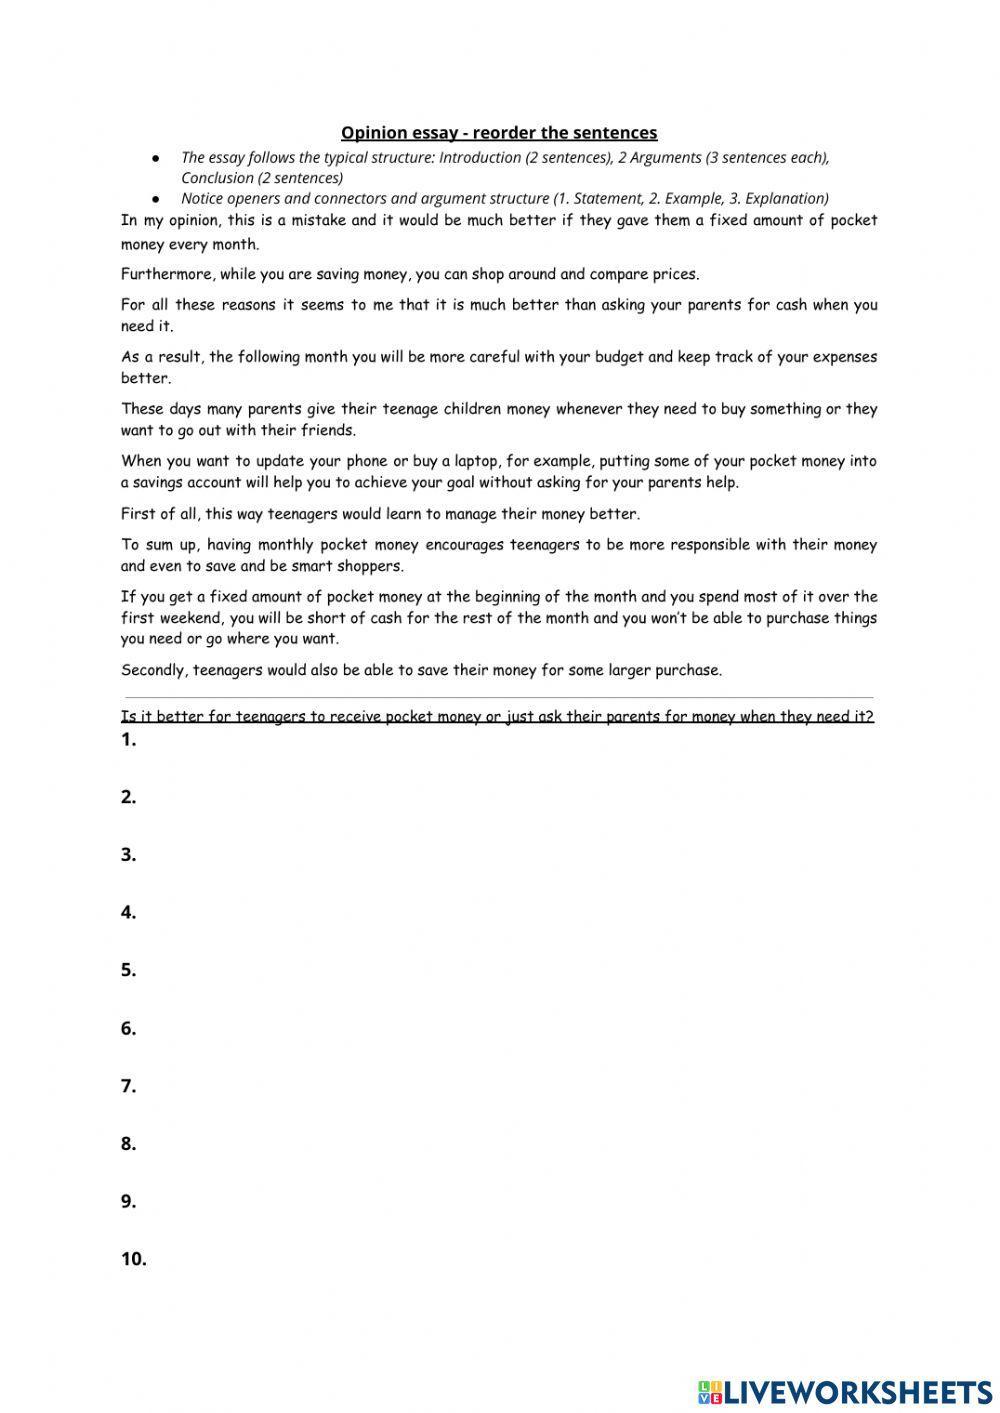 Opinion essay about pocket money